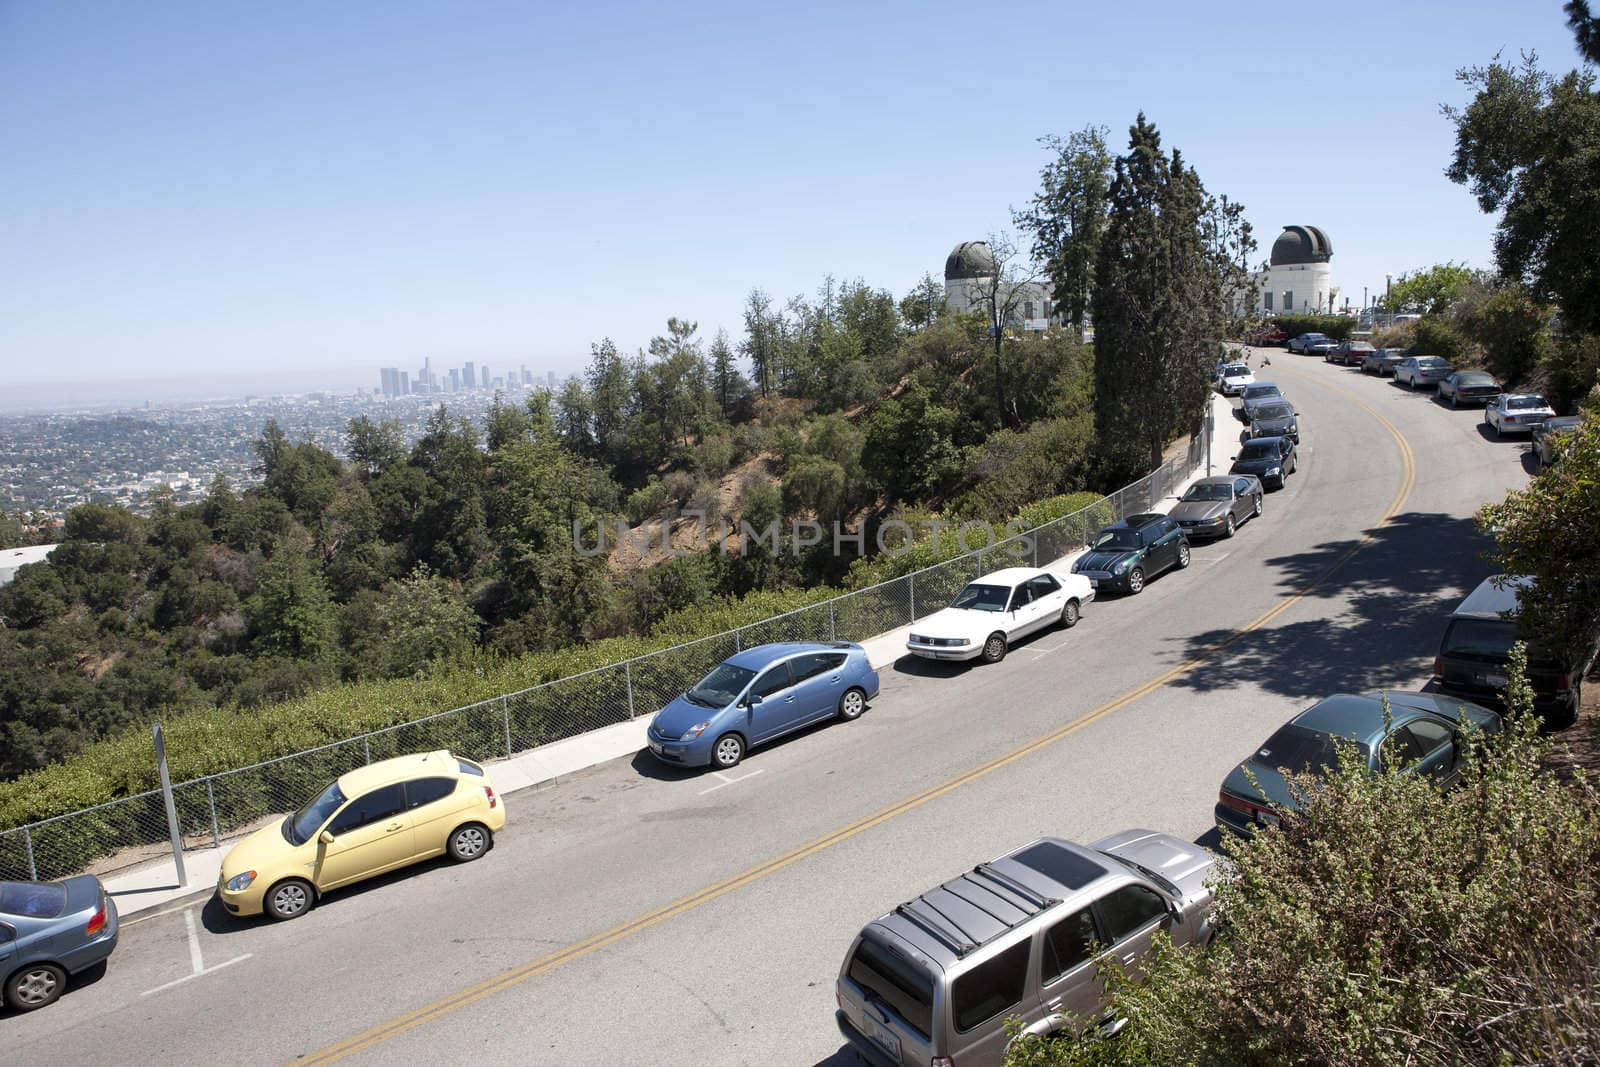 Streets full of cars near Griffith Observatory on a busy Saturday afternoon.